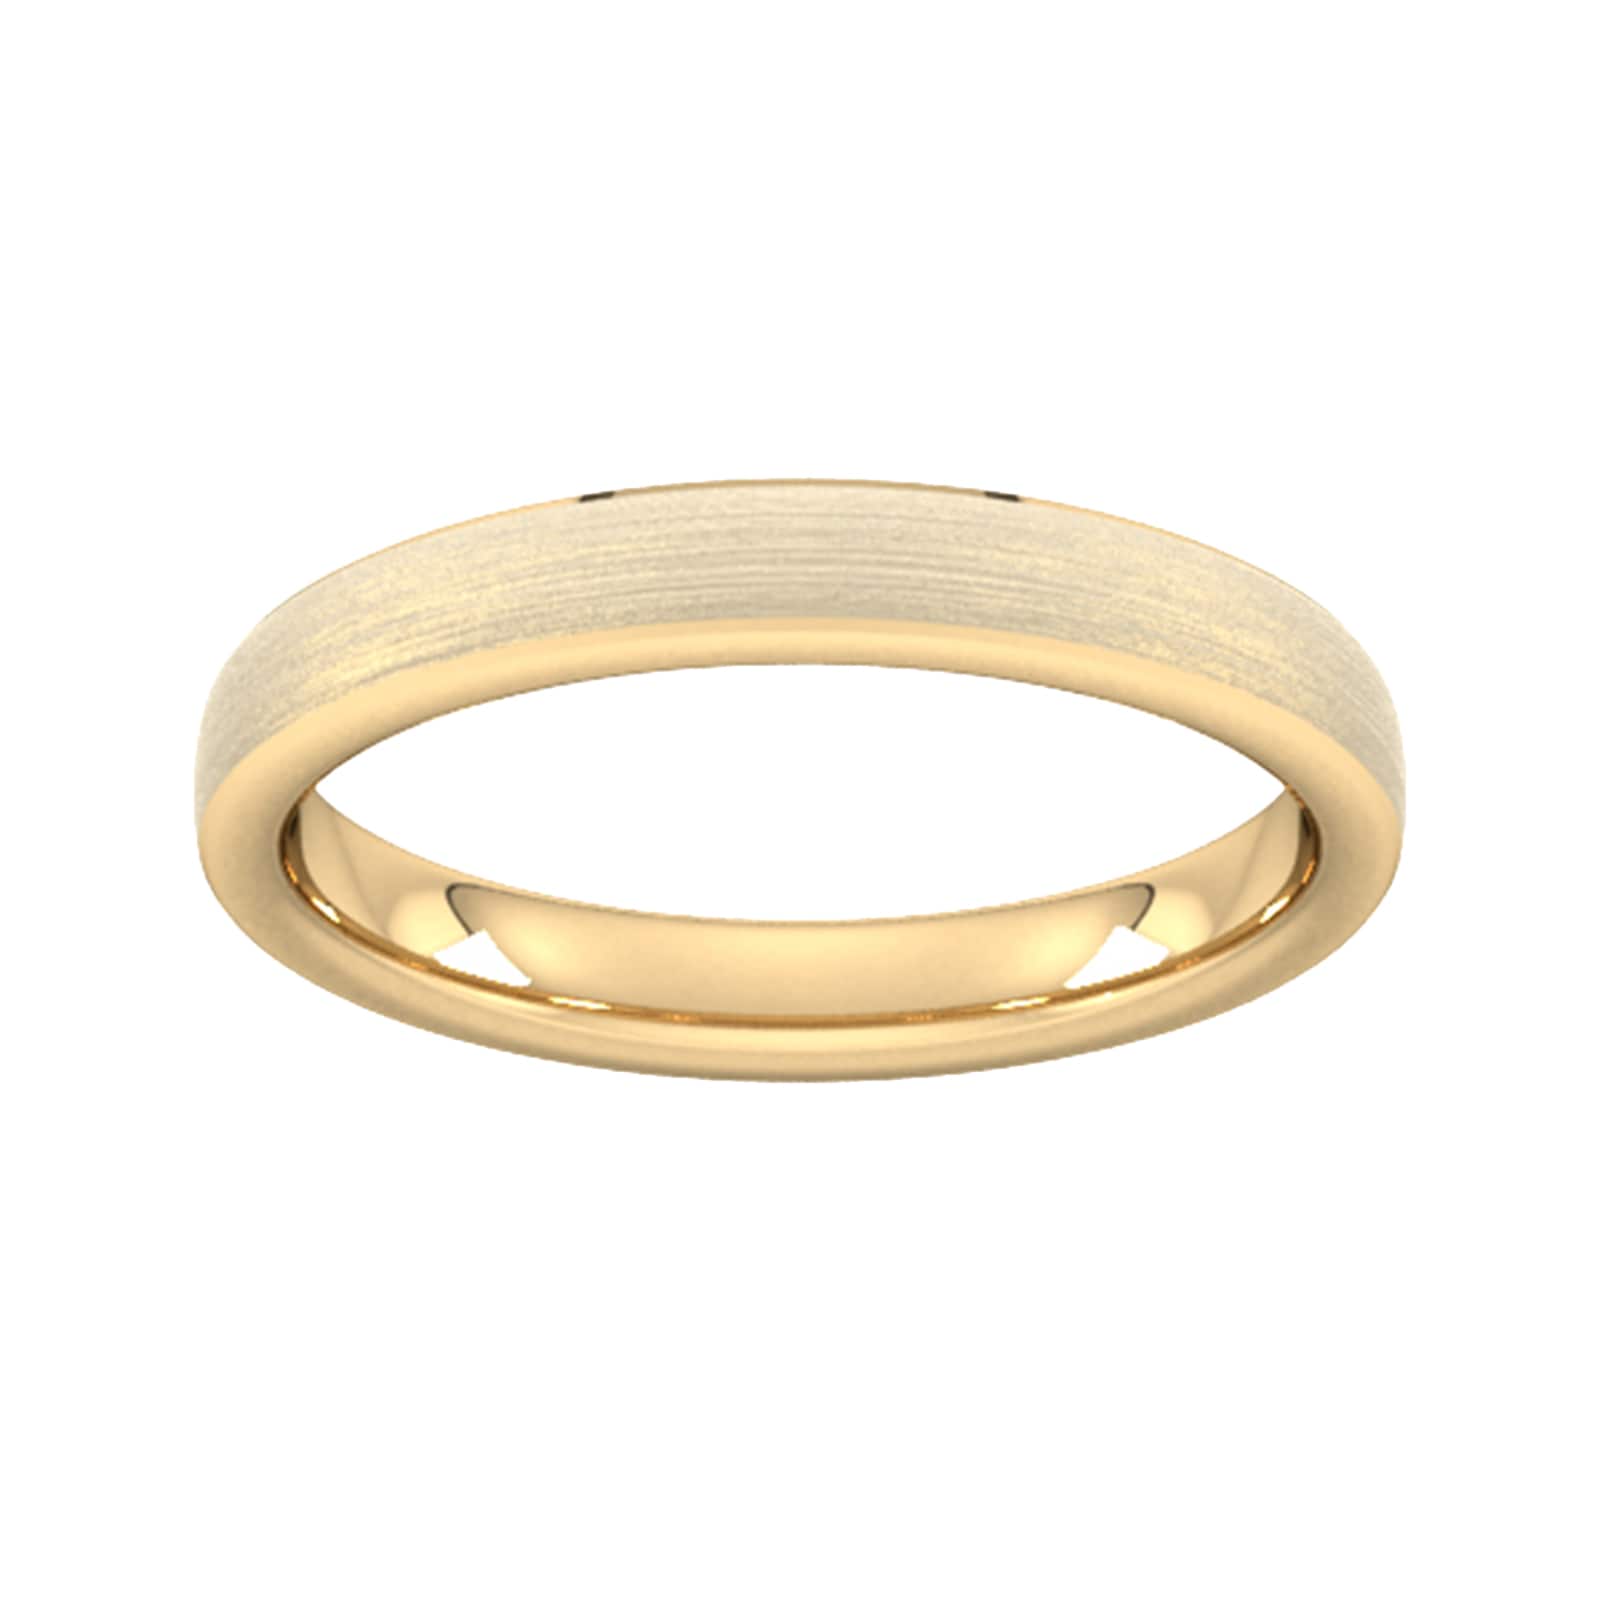 3mm D Shape Standard Polished Chamfered Edges With Matt Centre Wedding Ring In 18 Carat Yellow Gold - Ring Size G